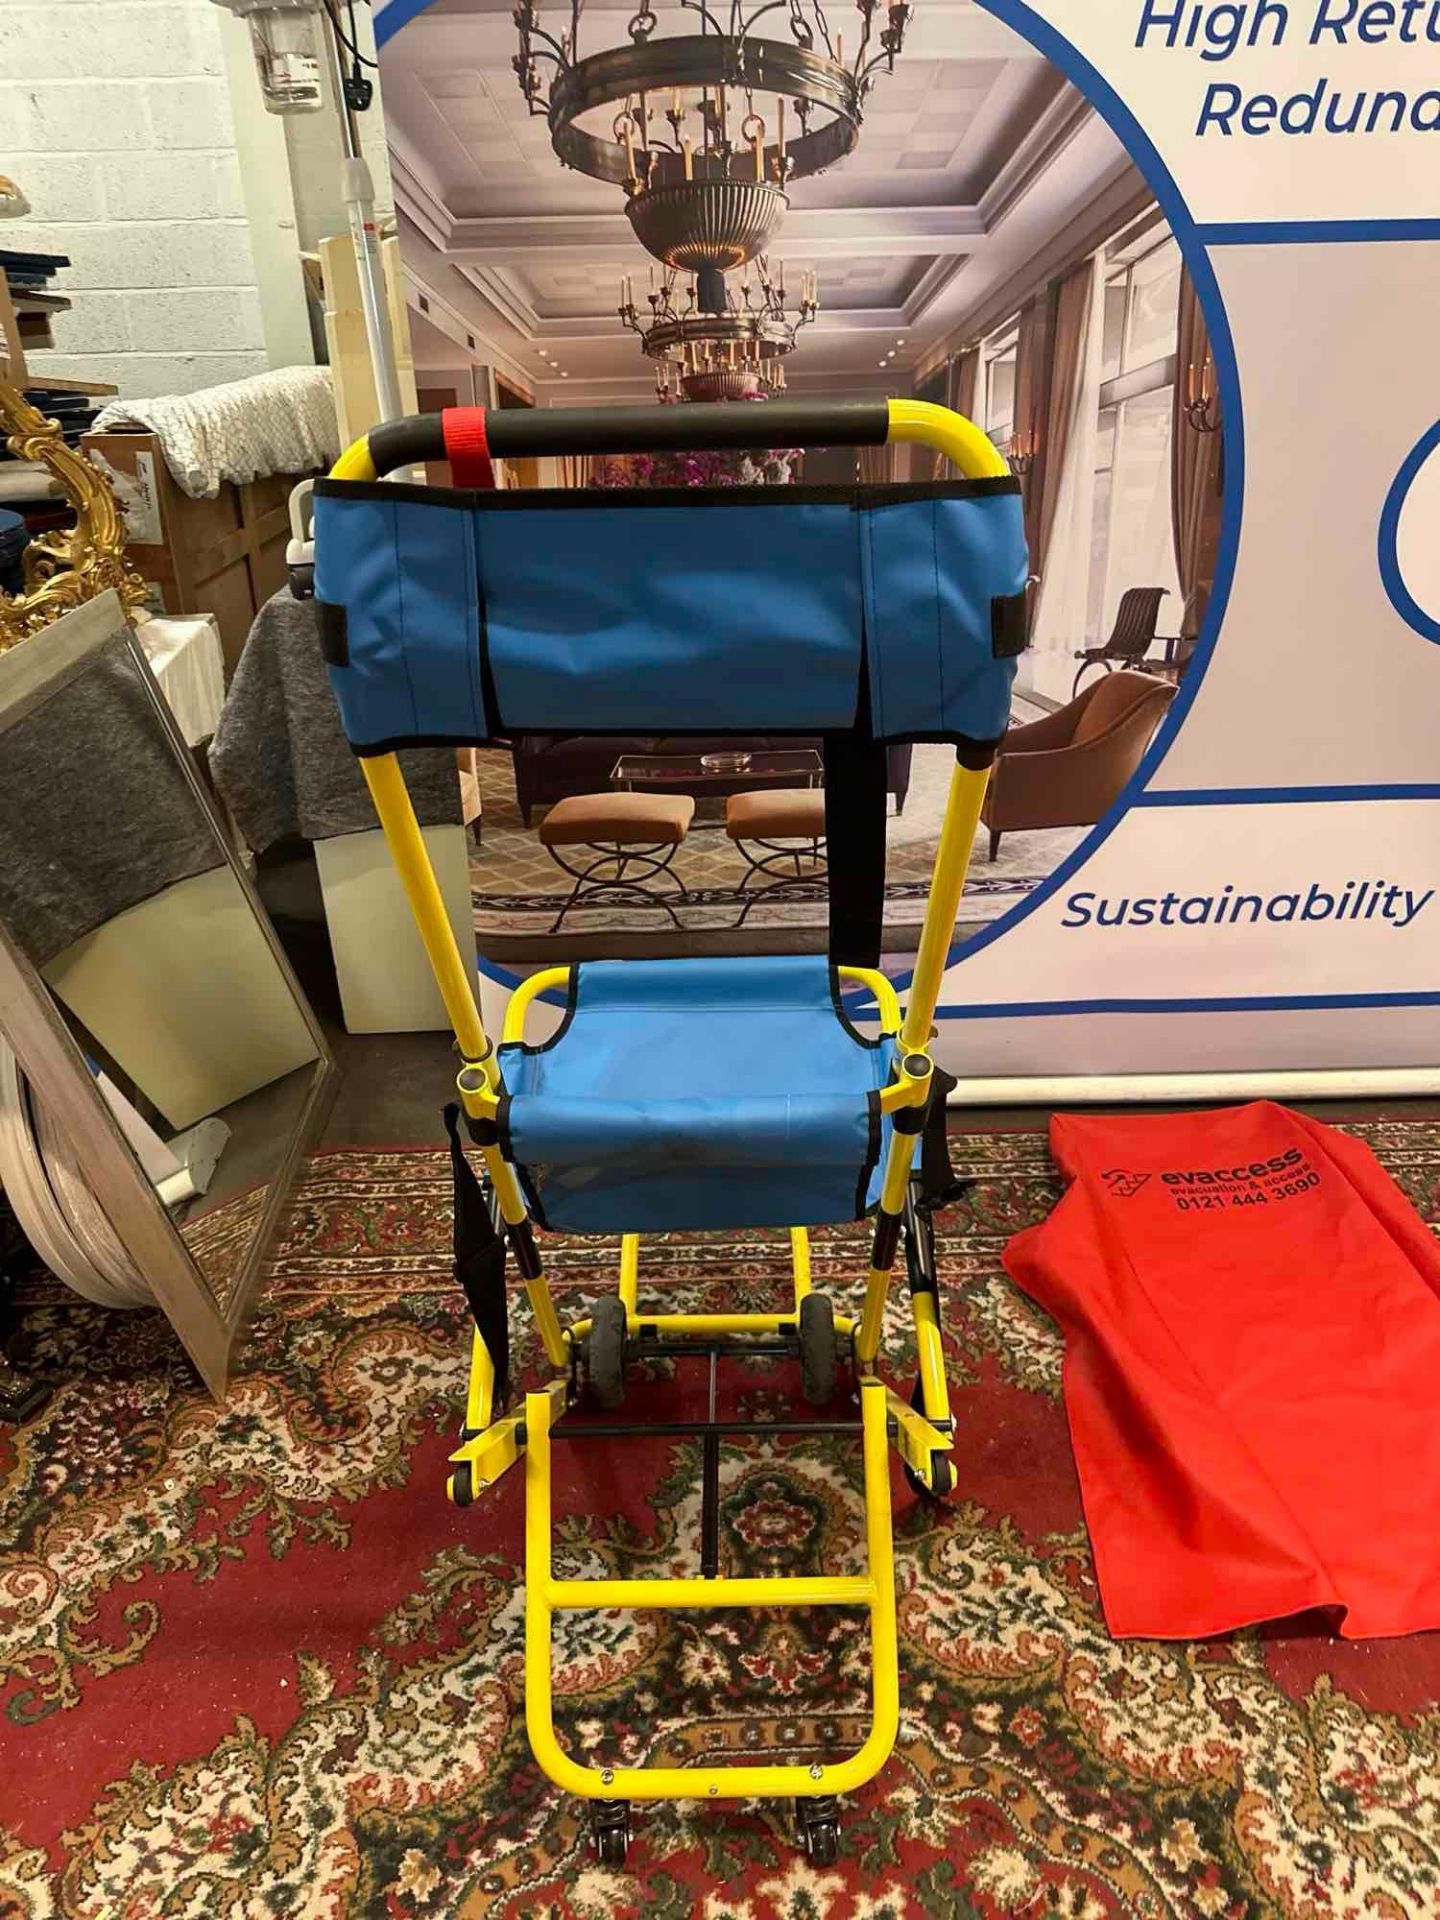 Antano Evacuation Chair With Cover Capacity: 135 Kg ; Weight: 14 Kg ; Dimensions: 138 x 35 x 53 - Image 4 of 5